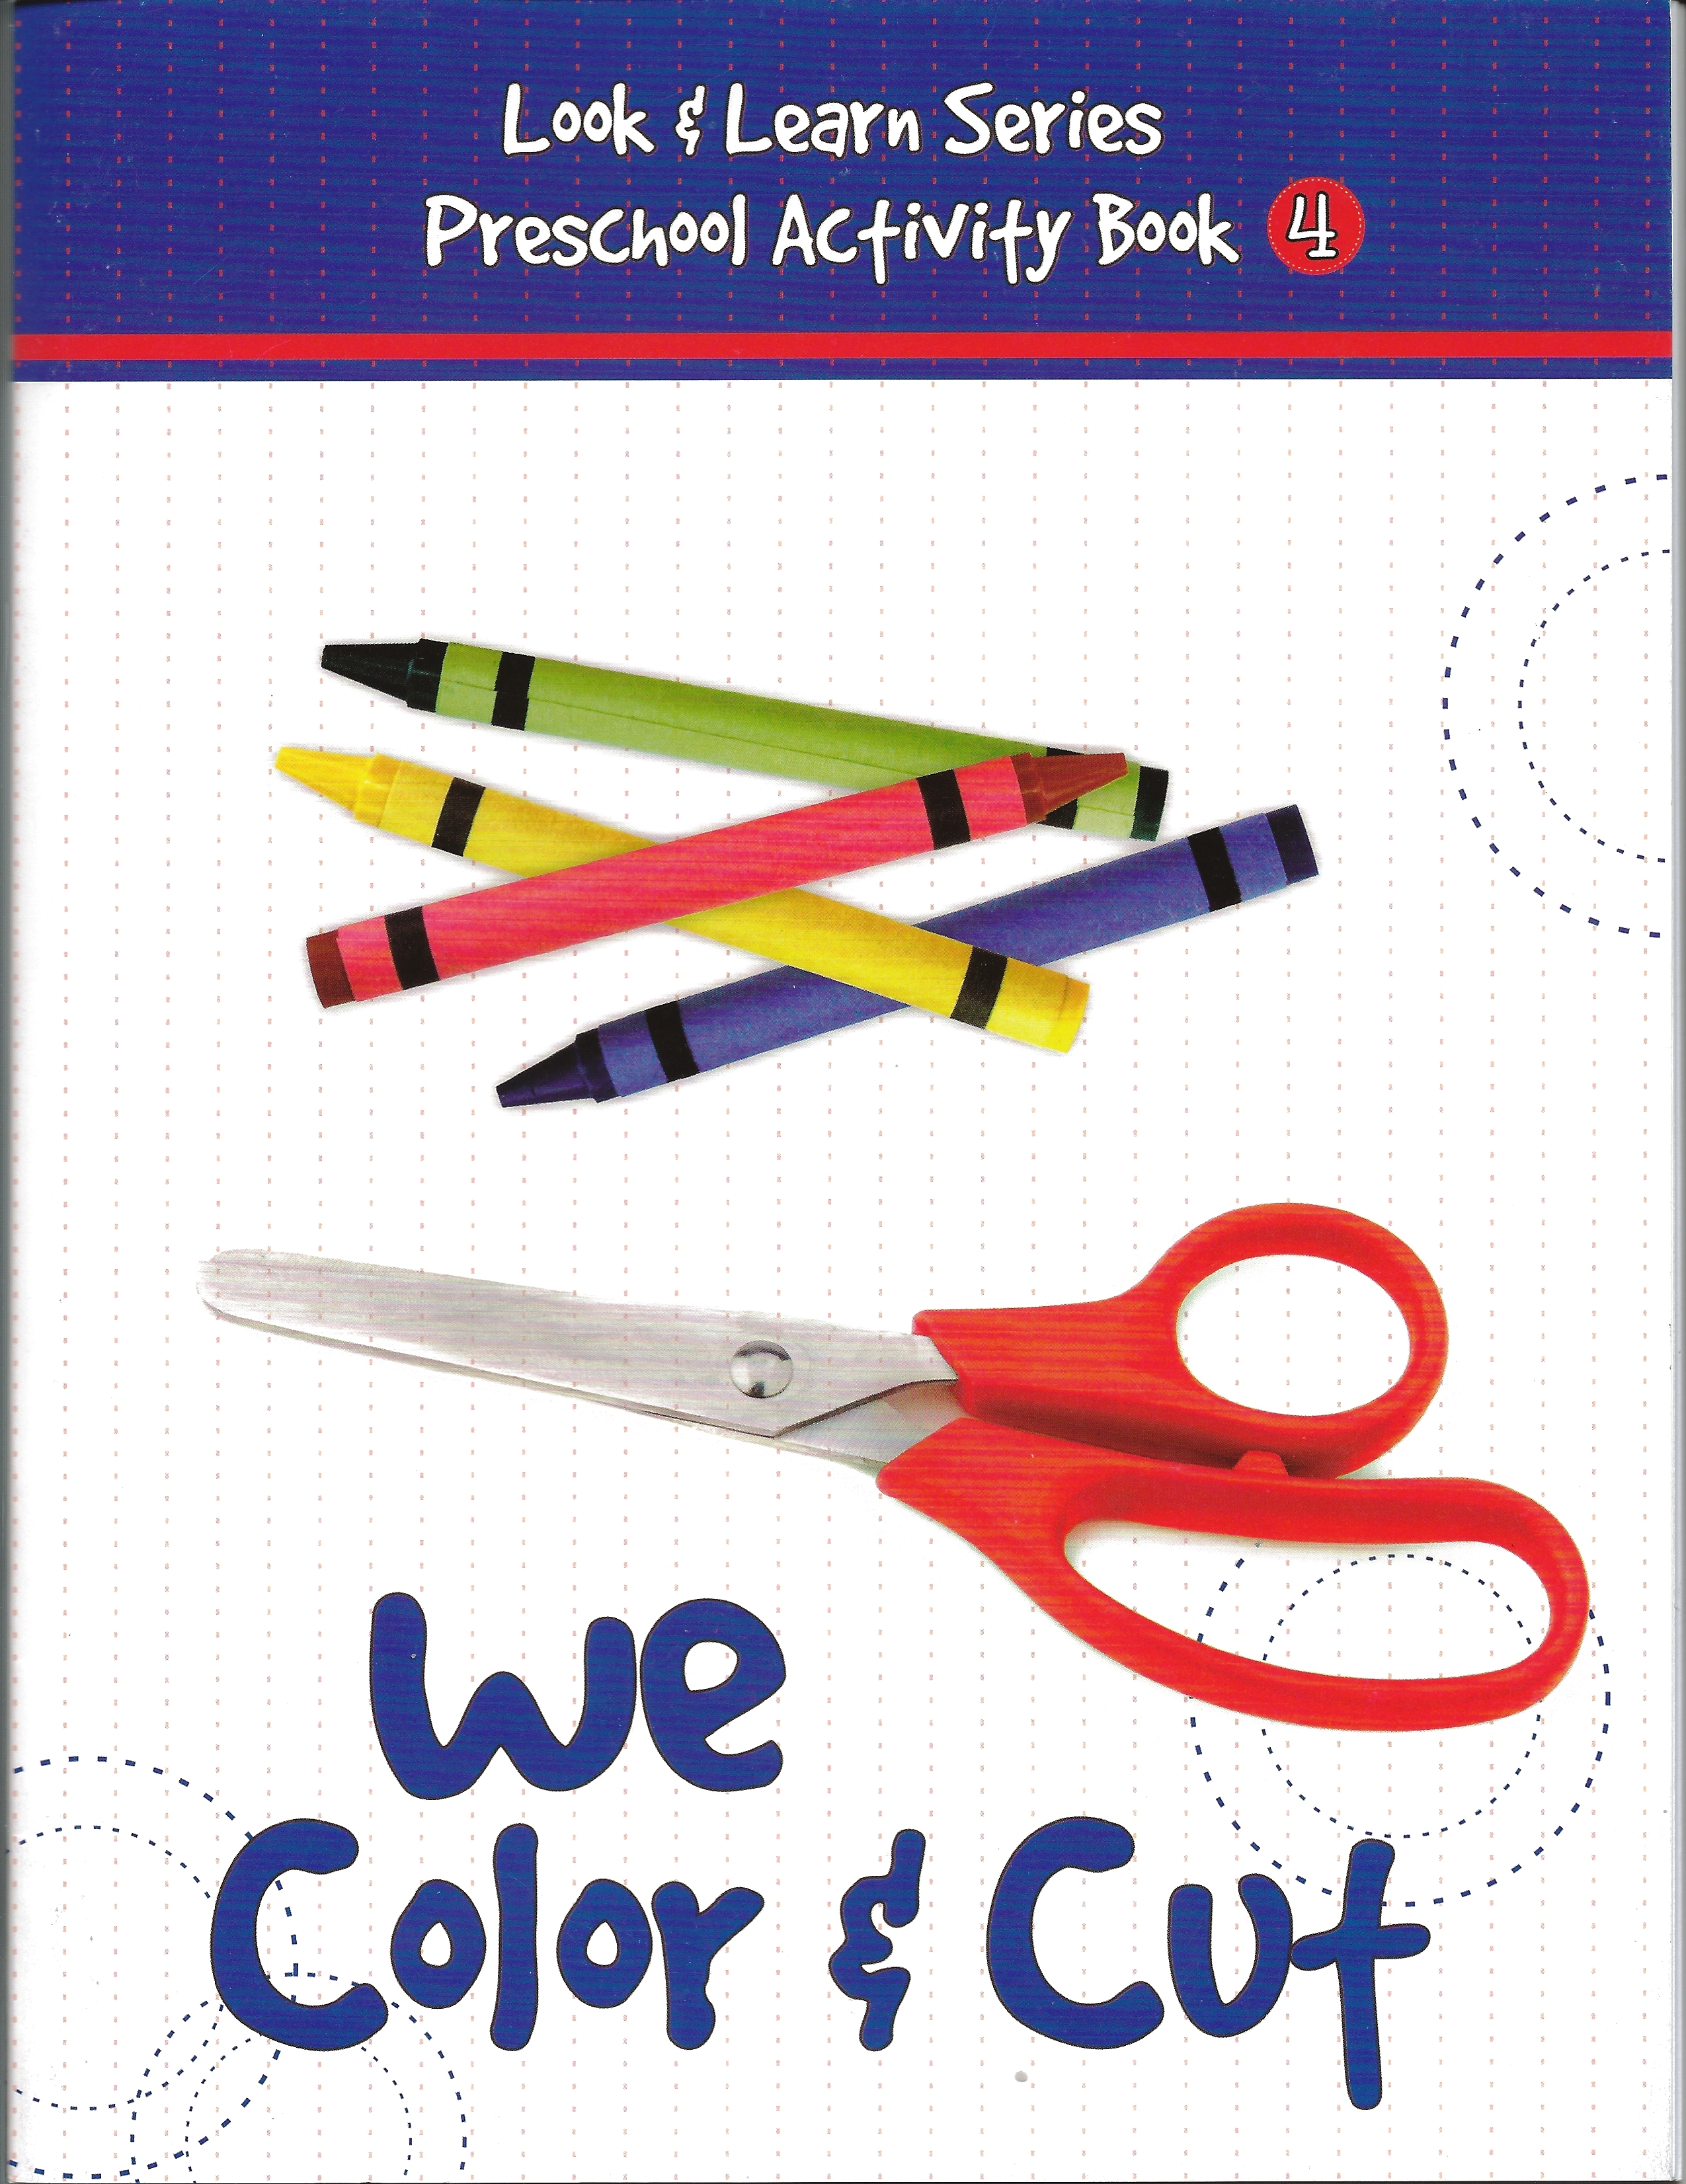 WE COLOR AND CUT compiled by Katie Weber